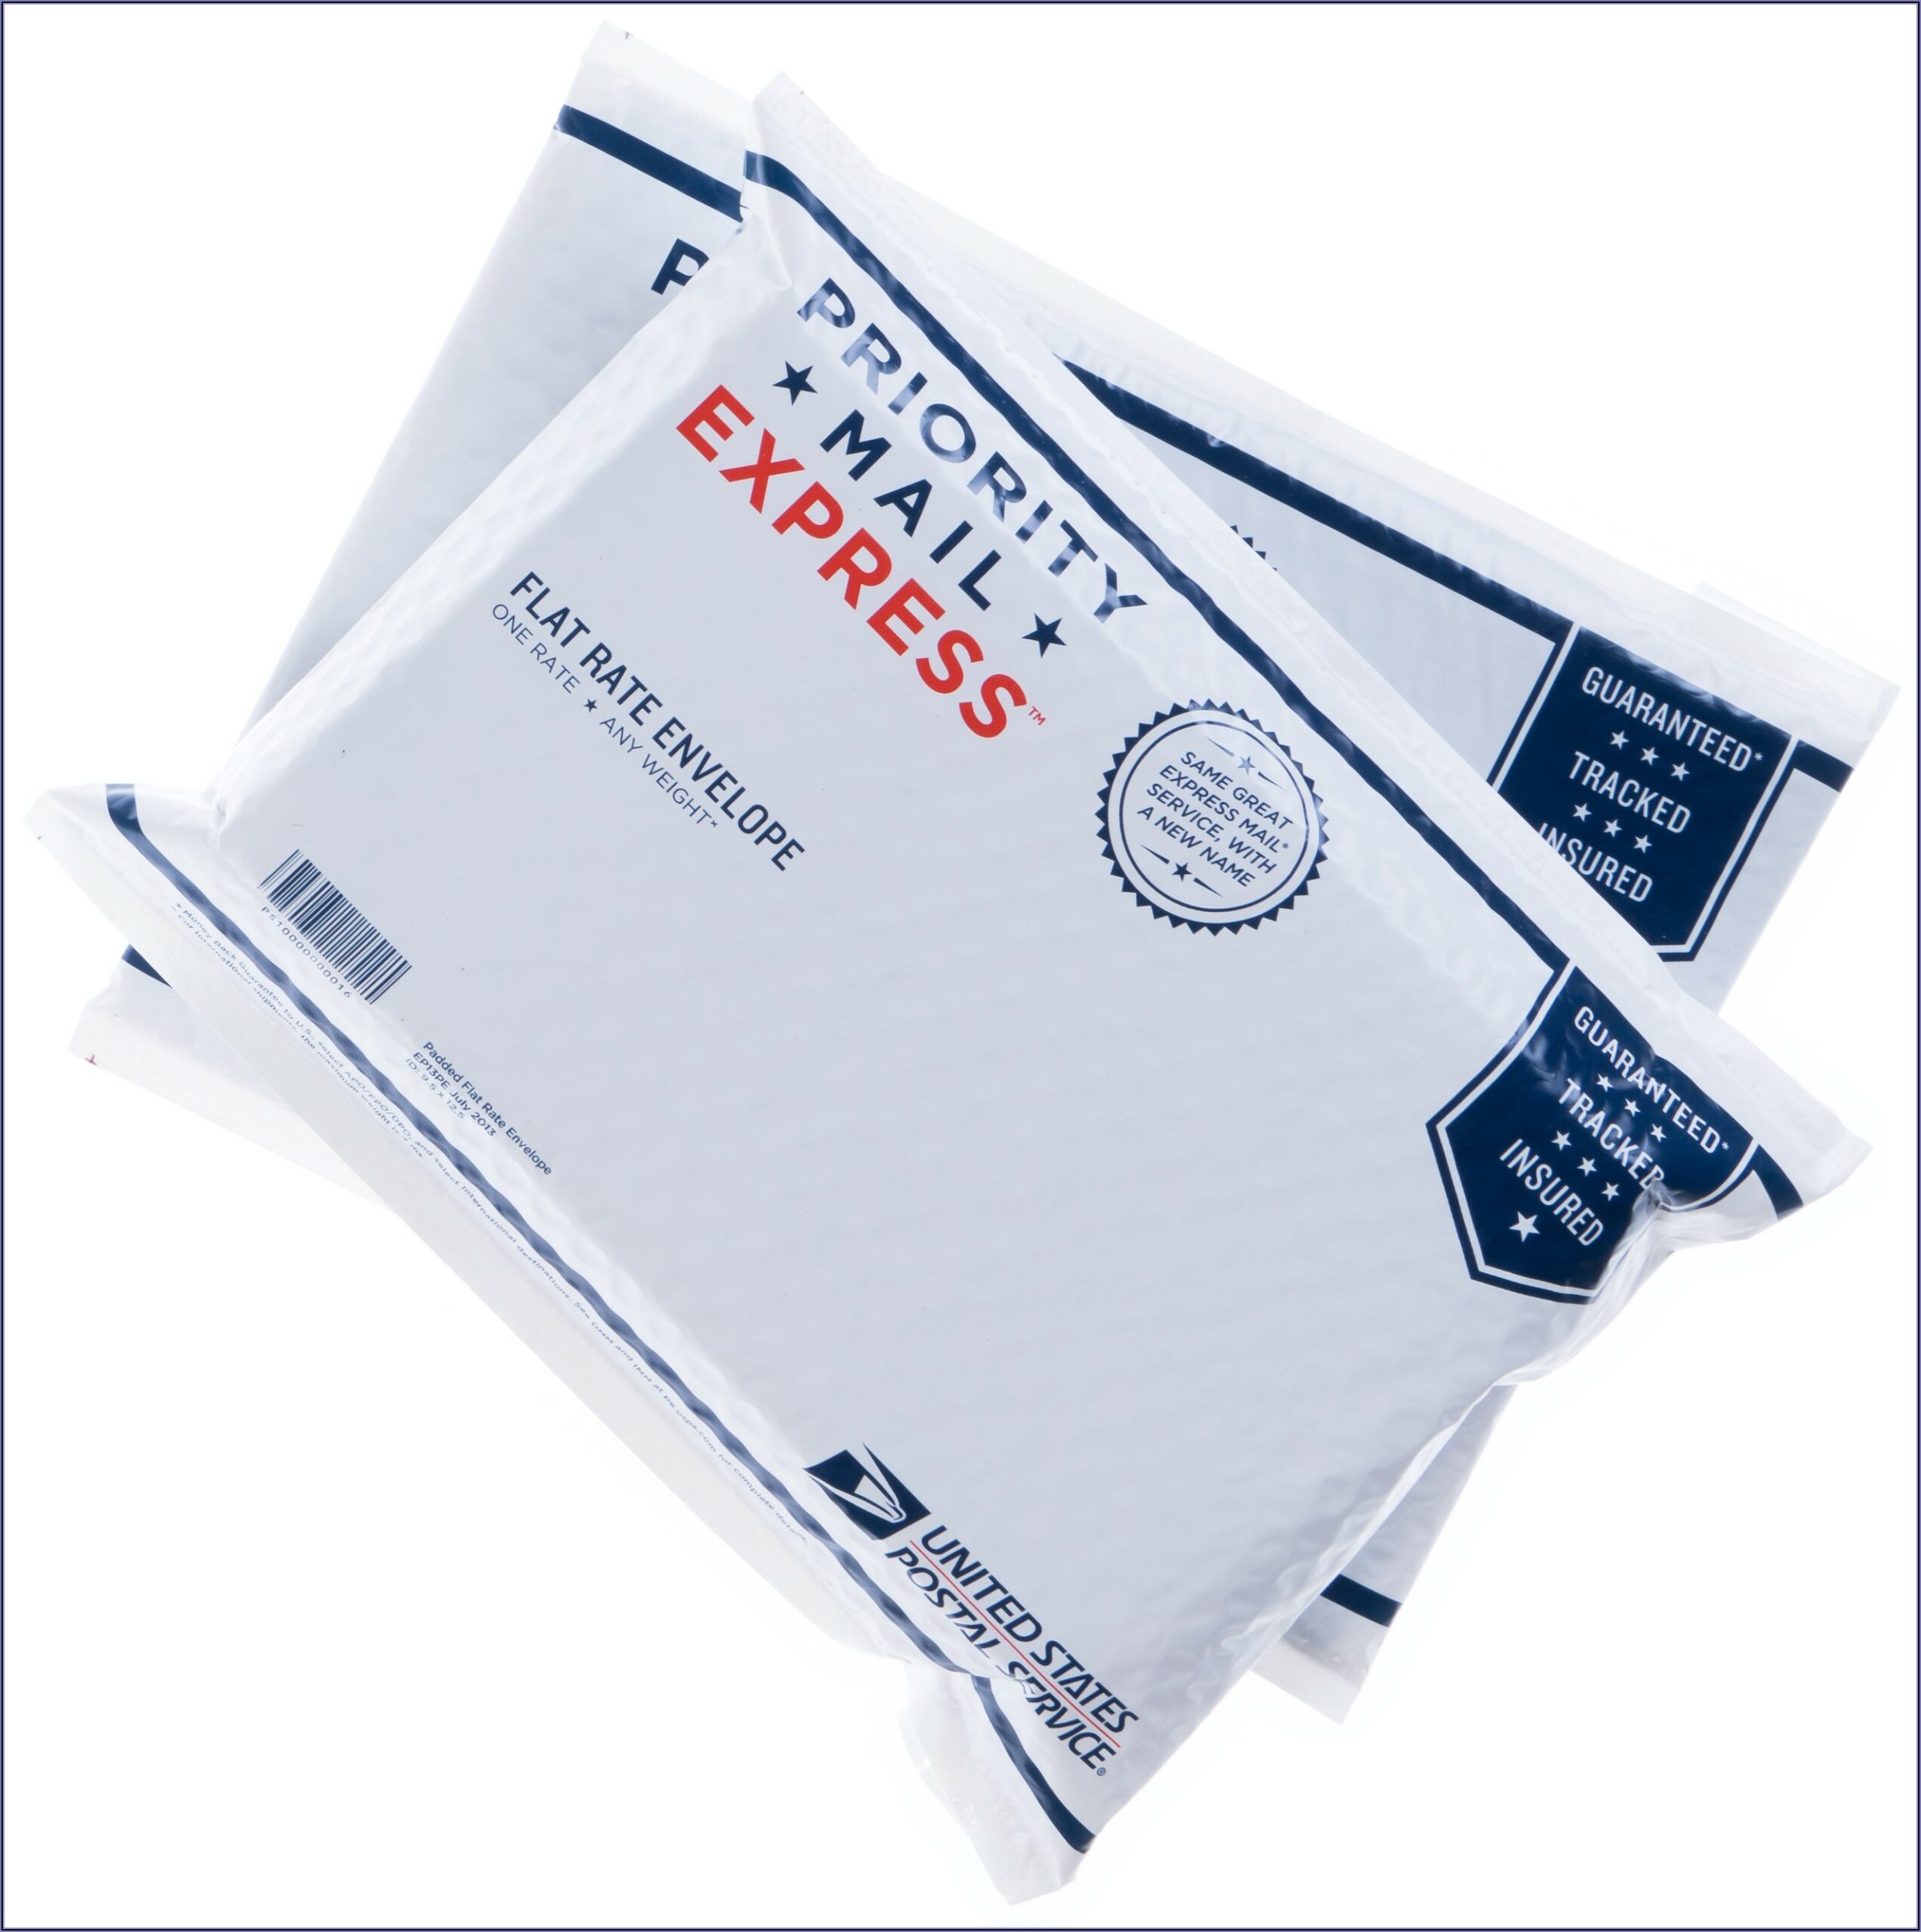 Priority Mail Express Envelope Example